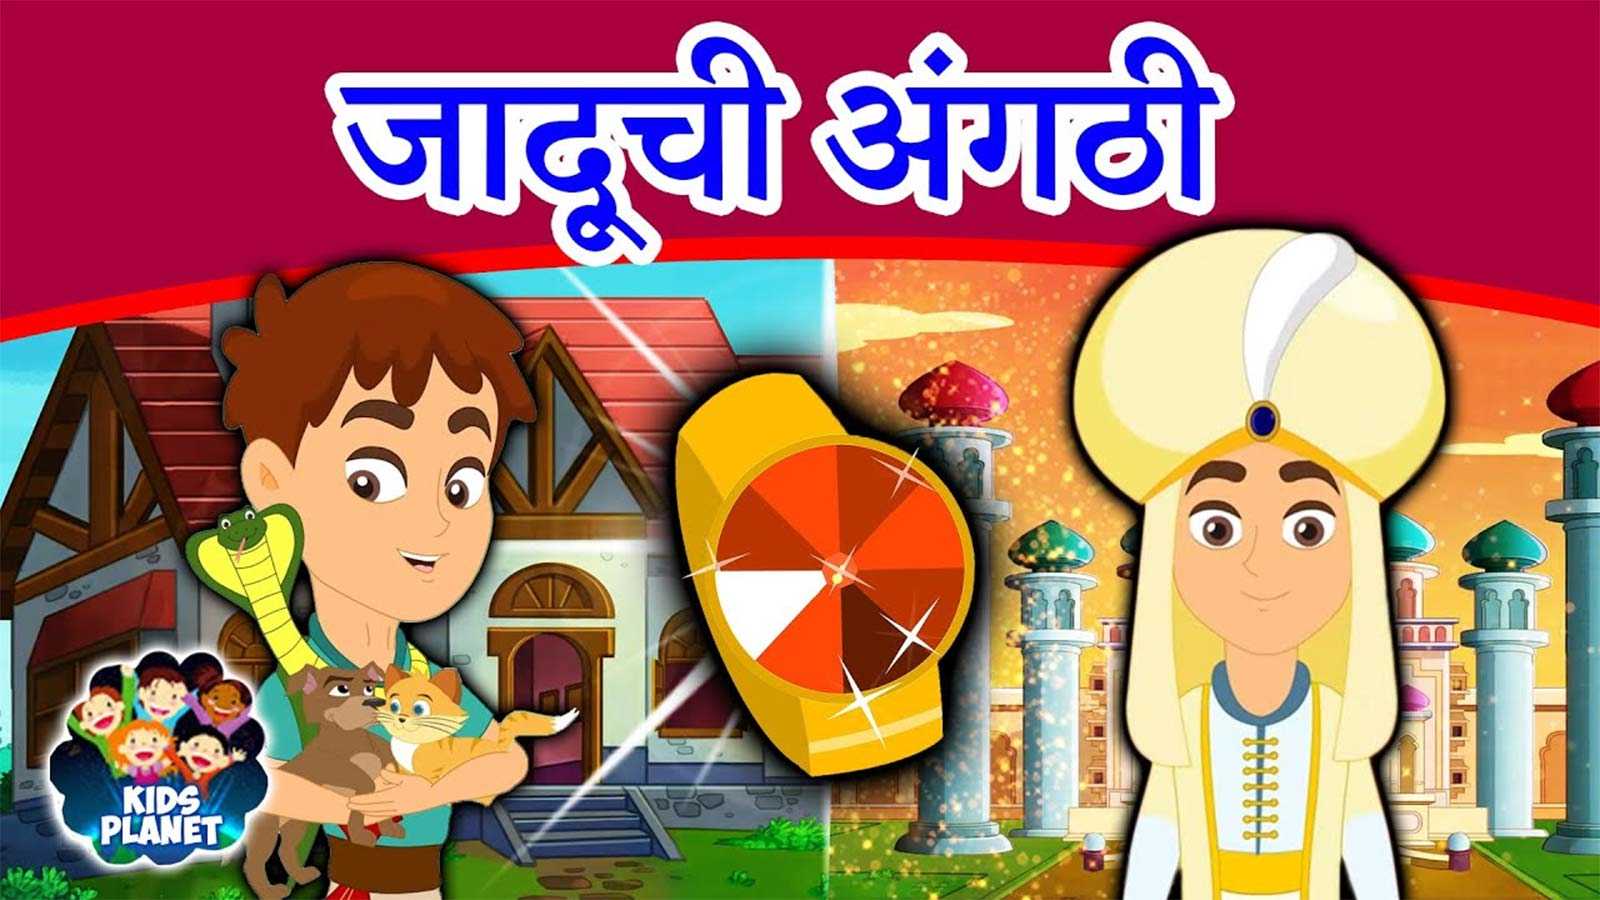 Kids Best Marathi Story 'जादूची अंगठी(The Magic Ring In Marathi)' - Marathi  Moral Story For Kids | Entertainment - Times of India Videos